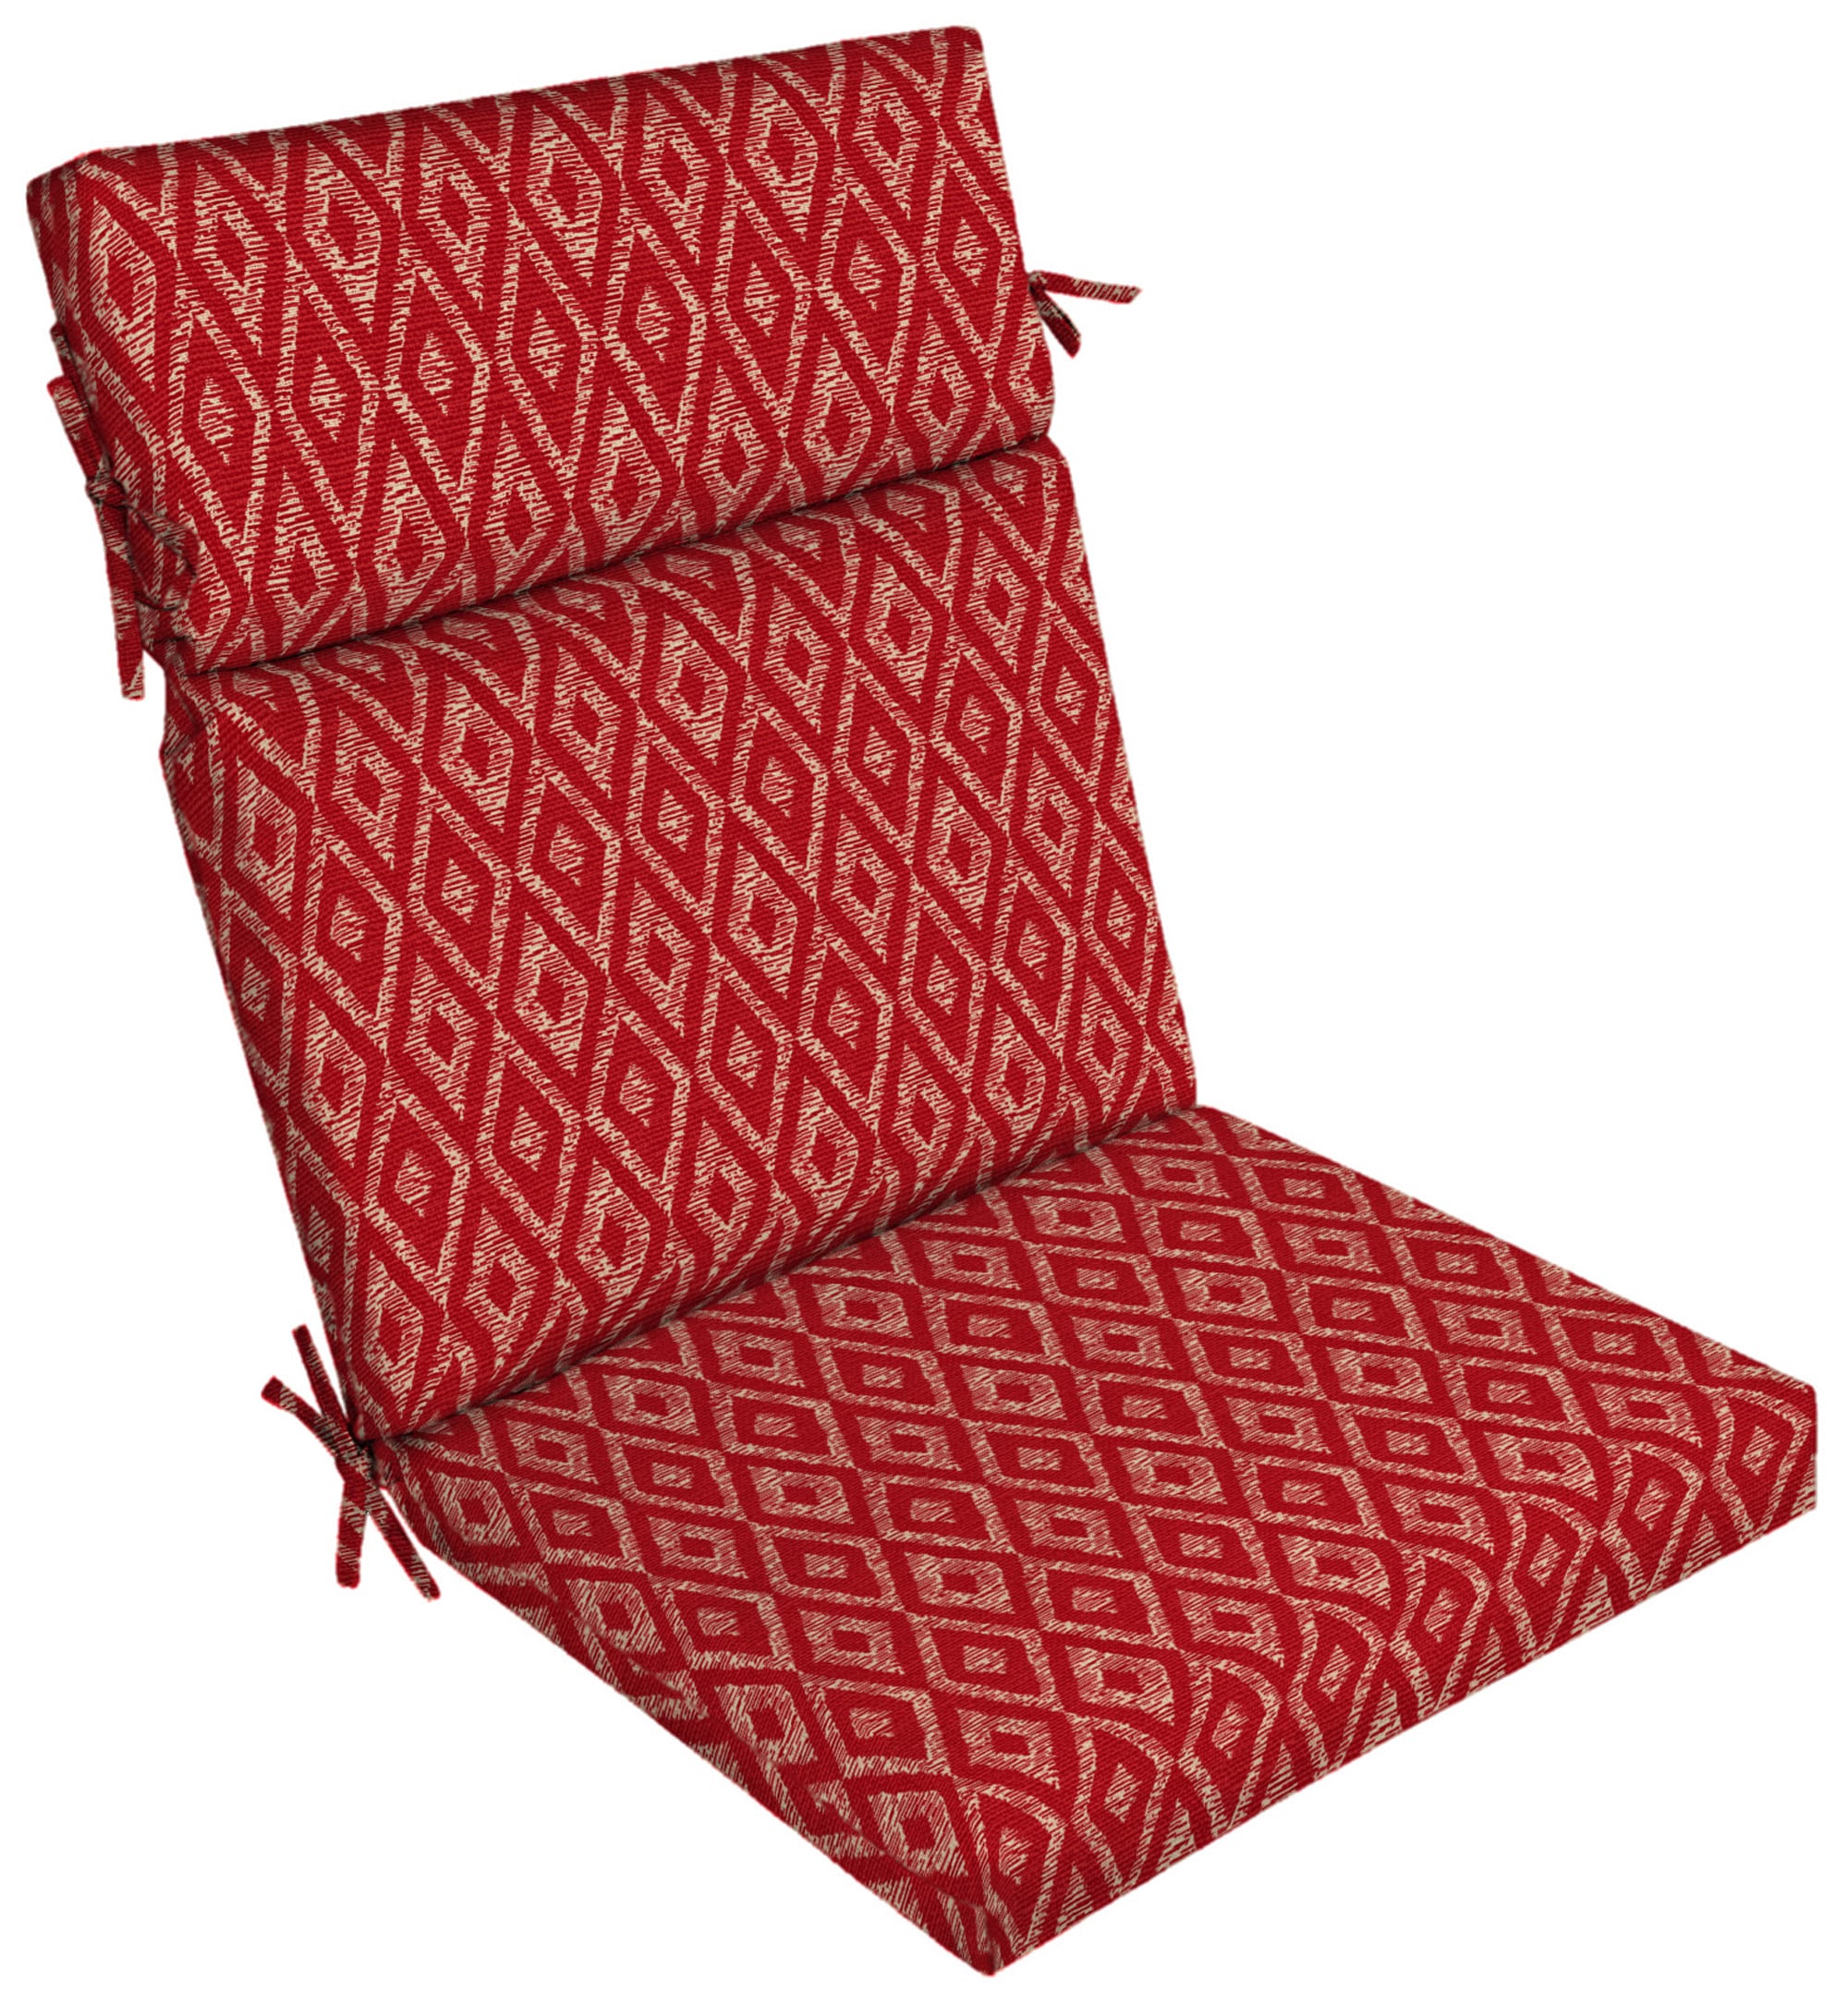 Garden Treasures Patio Furniture Cushions at Lowes.com